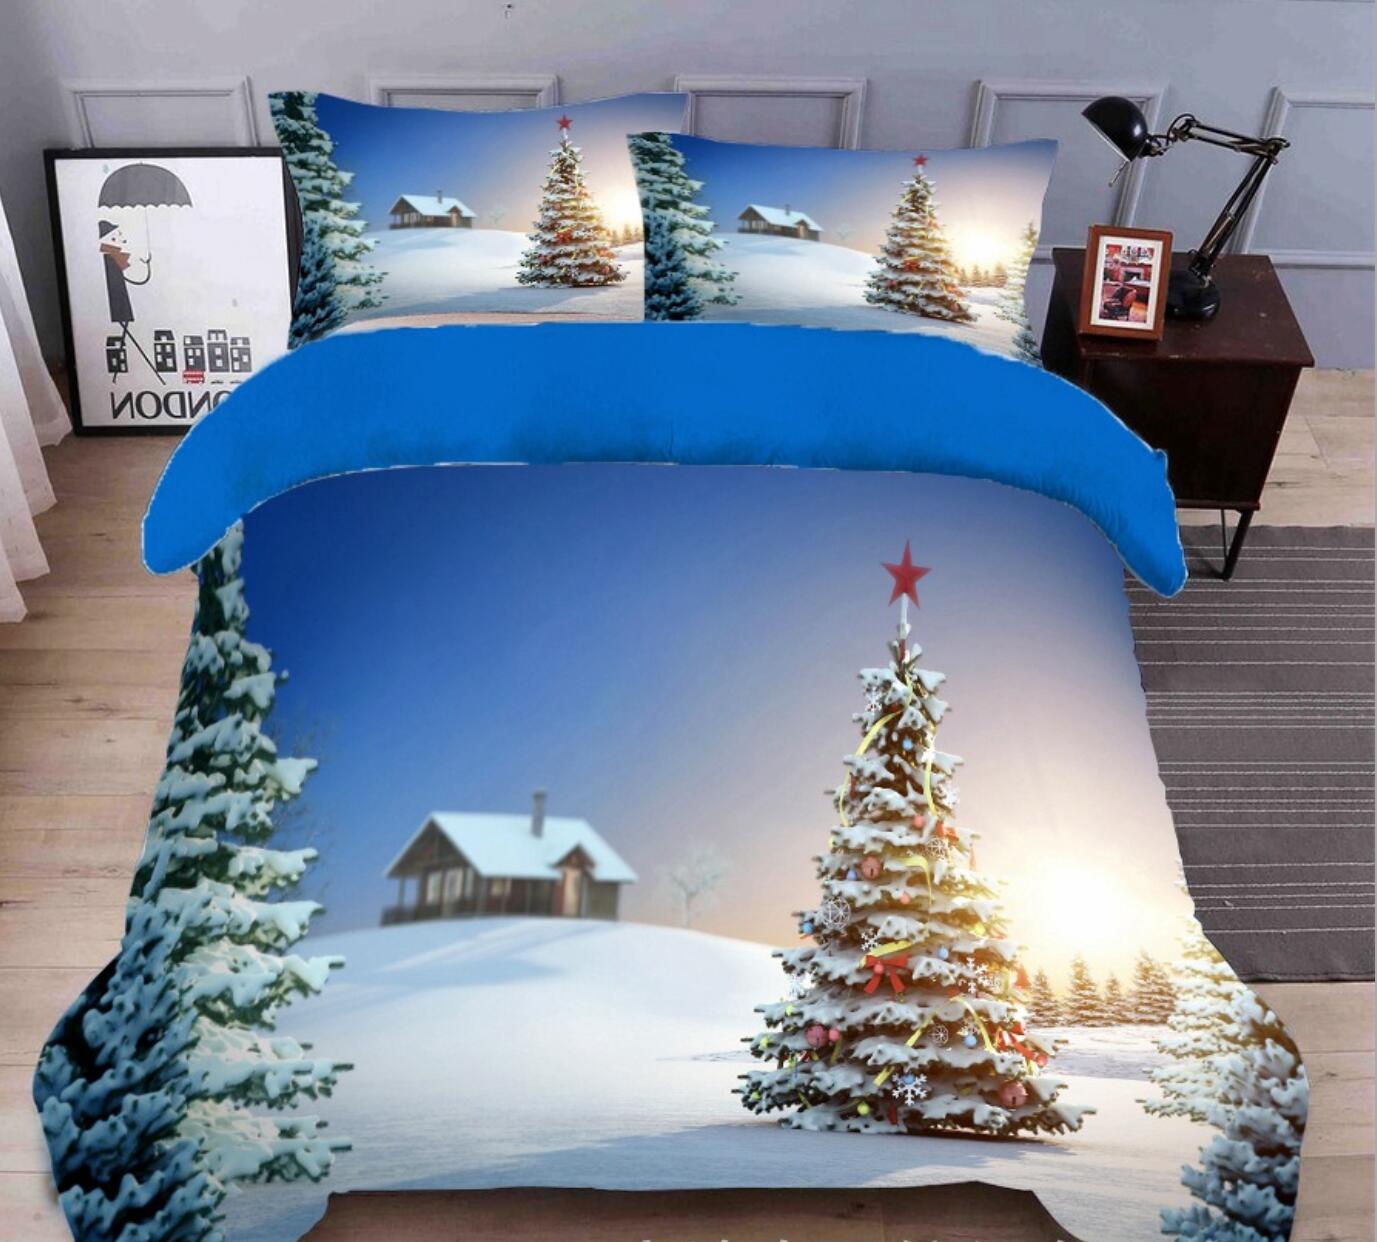 3D Snow Tree House 32043 Christmas Quilt Duvet Cover Xmas Bed Pillowcases